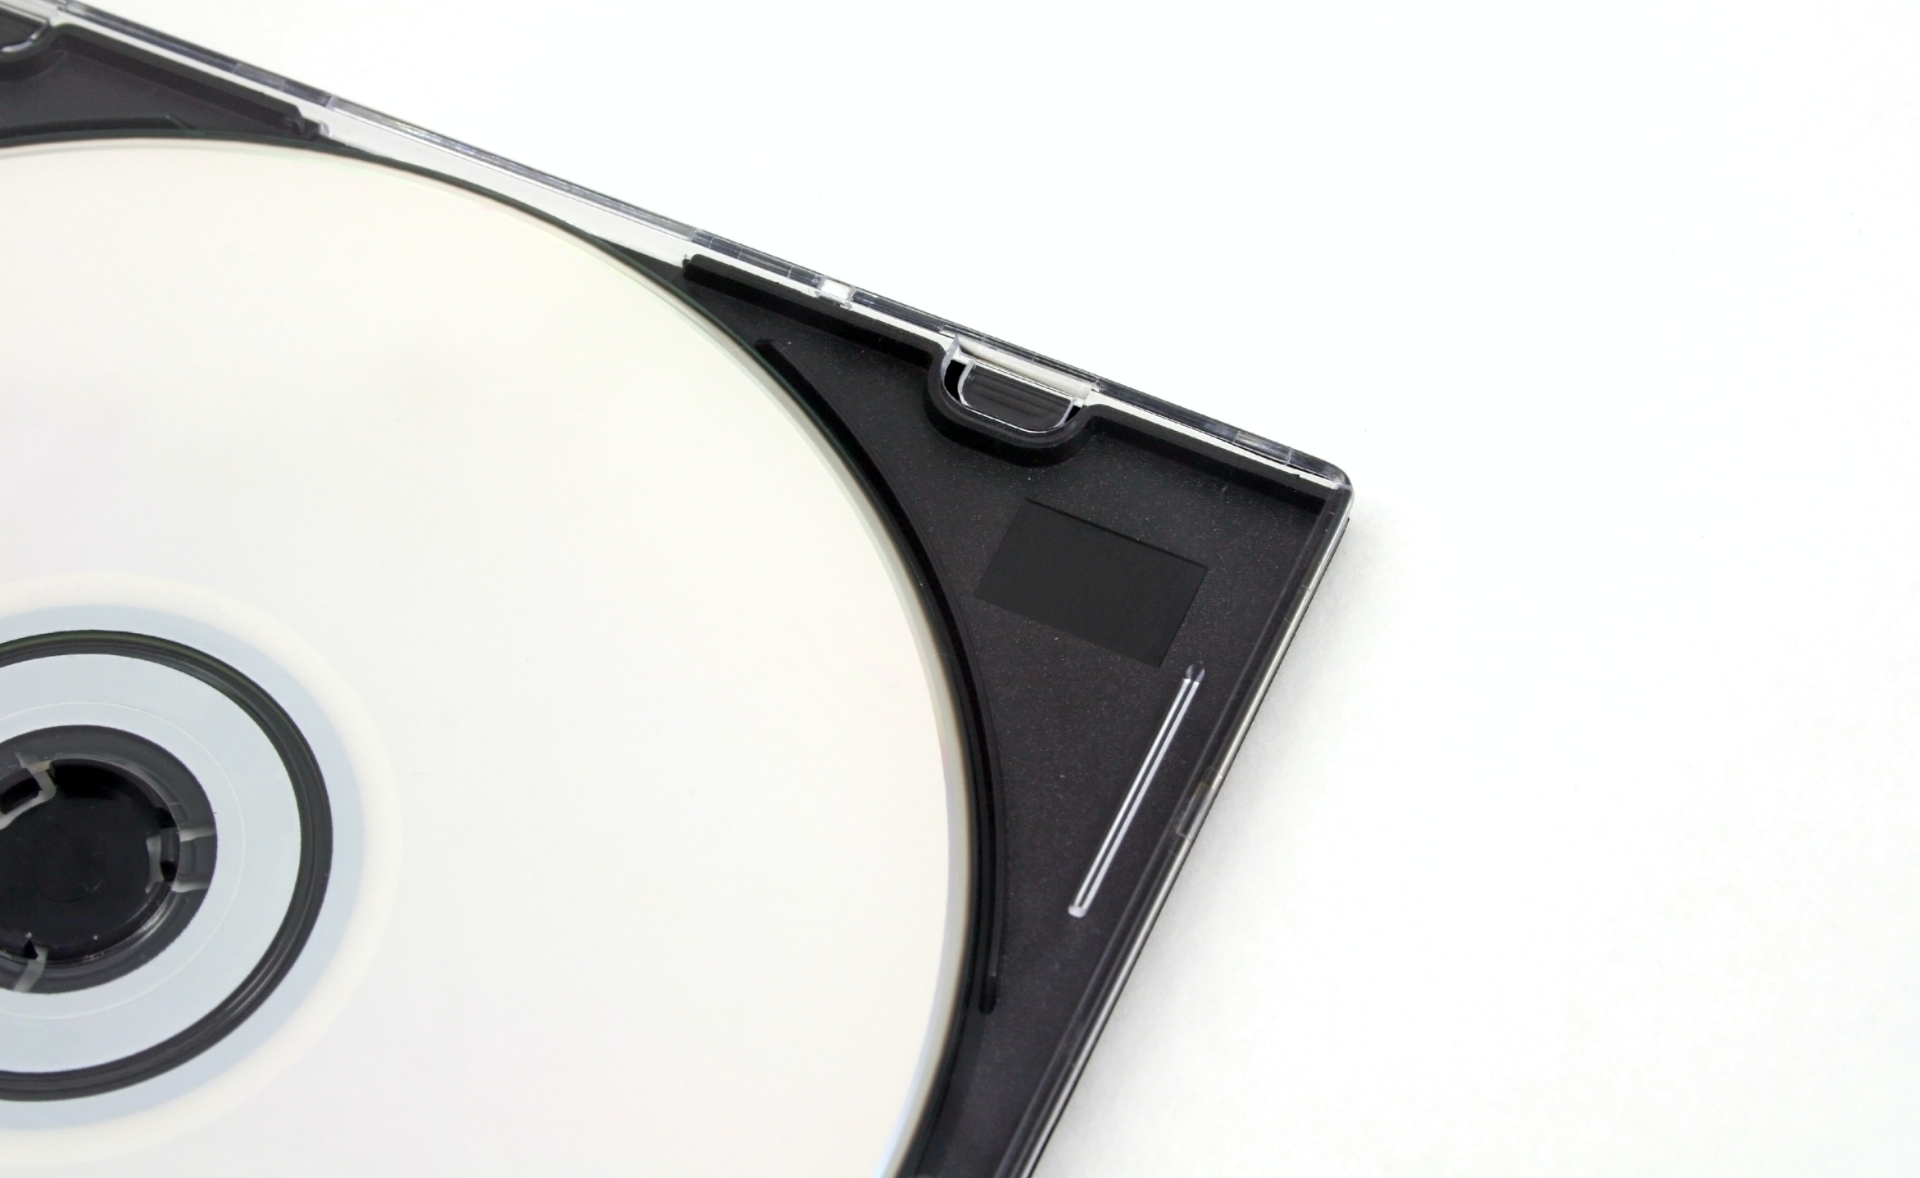 What are DVD-R discs? An explanation of how DVD-Rs work and their